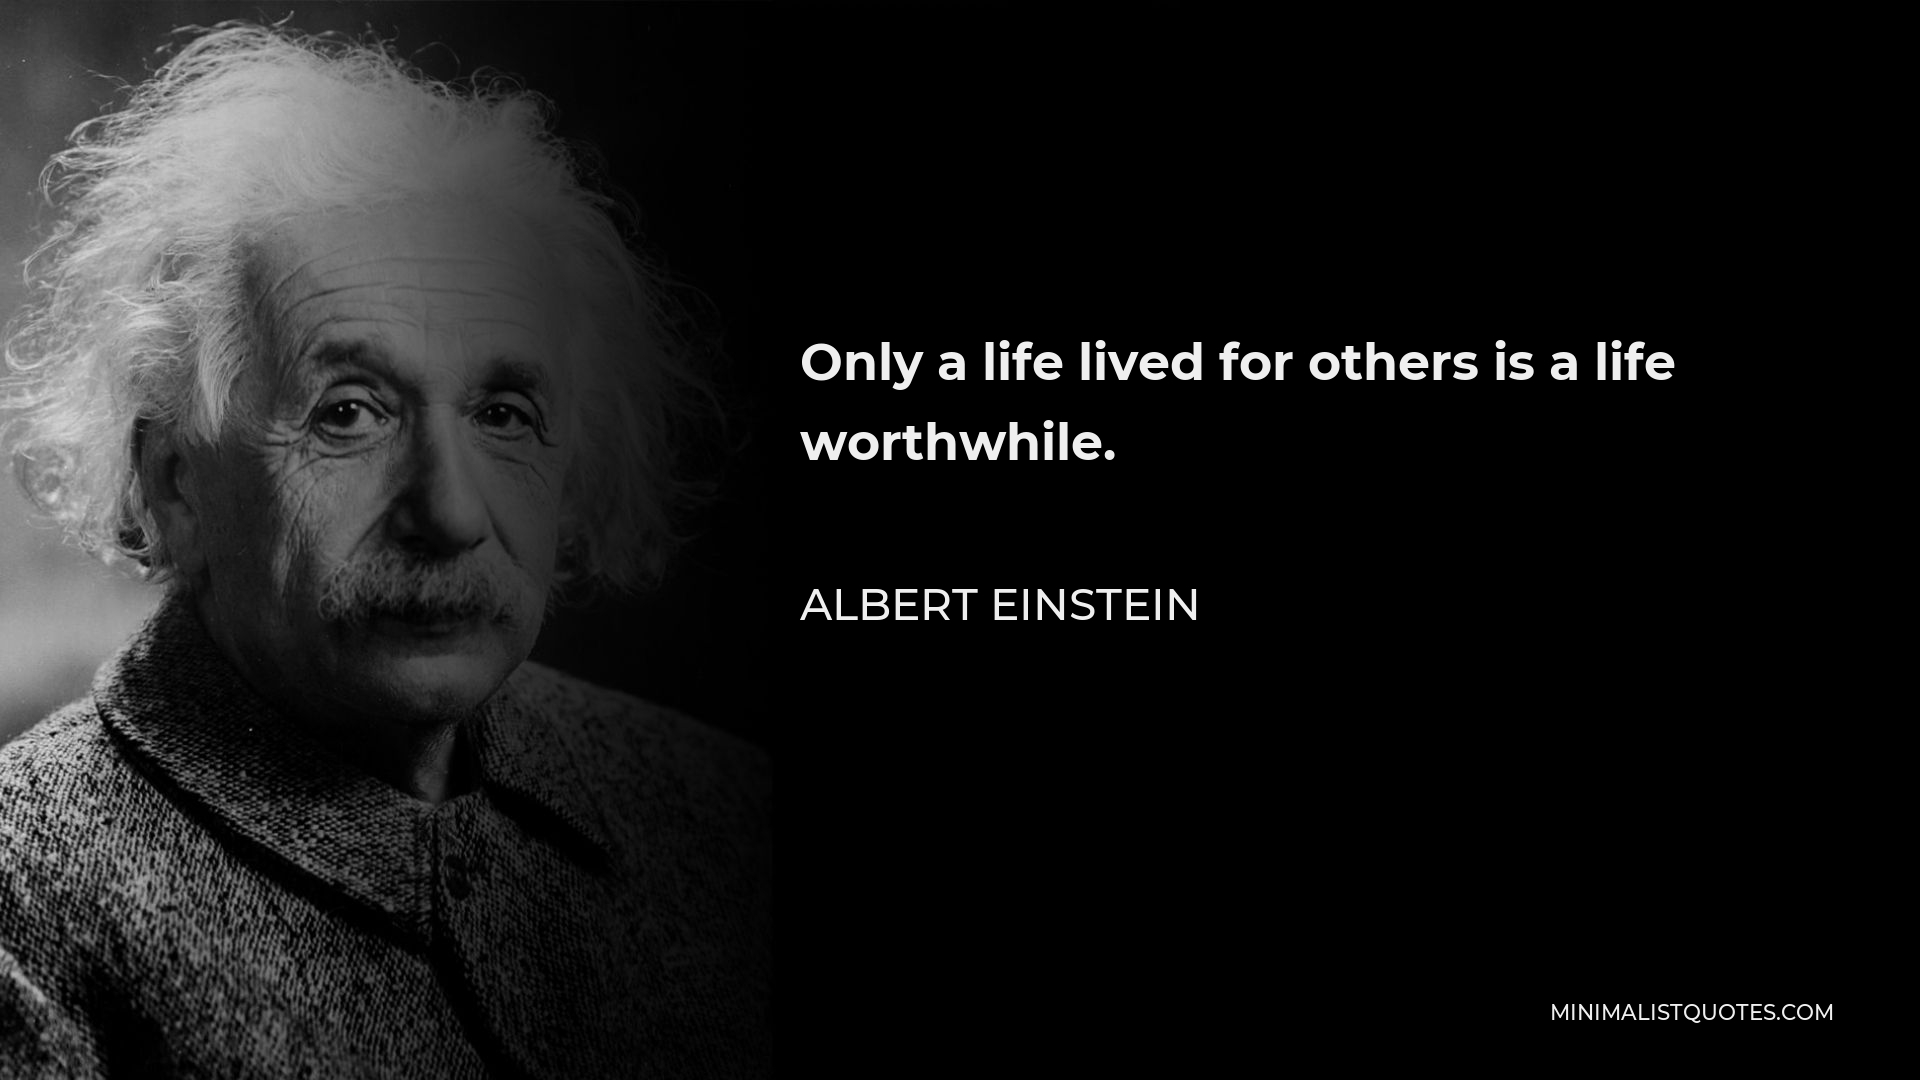 Albert Einstein Quote - Only a life lived for others is a life worthwhile.